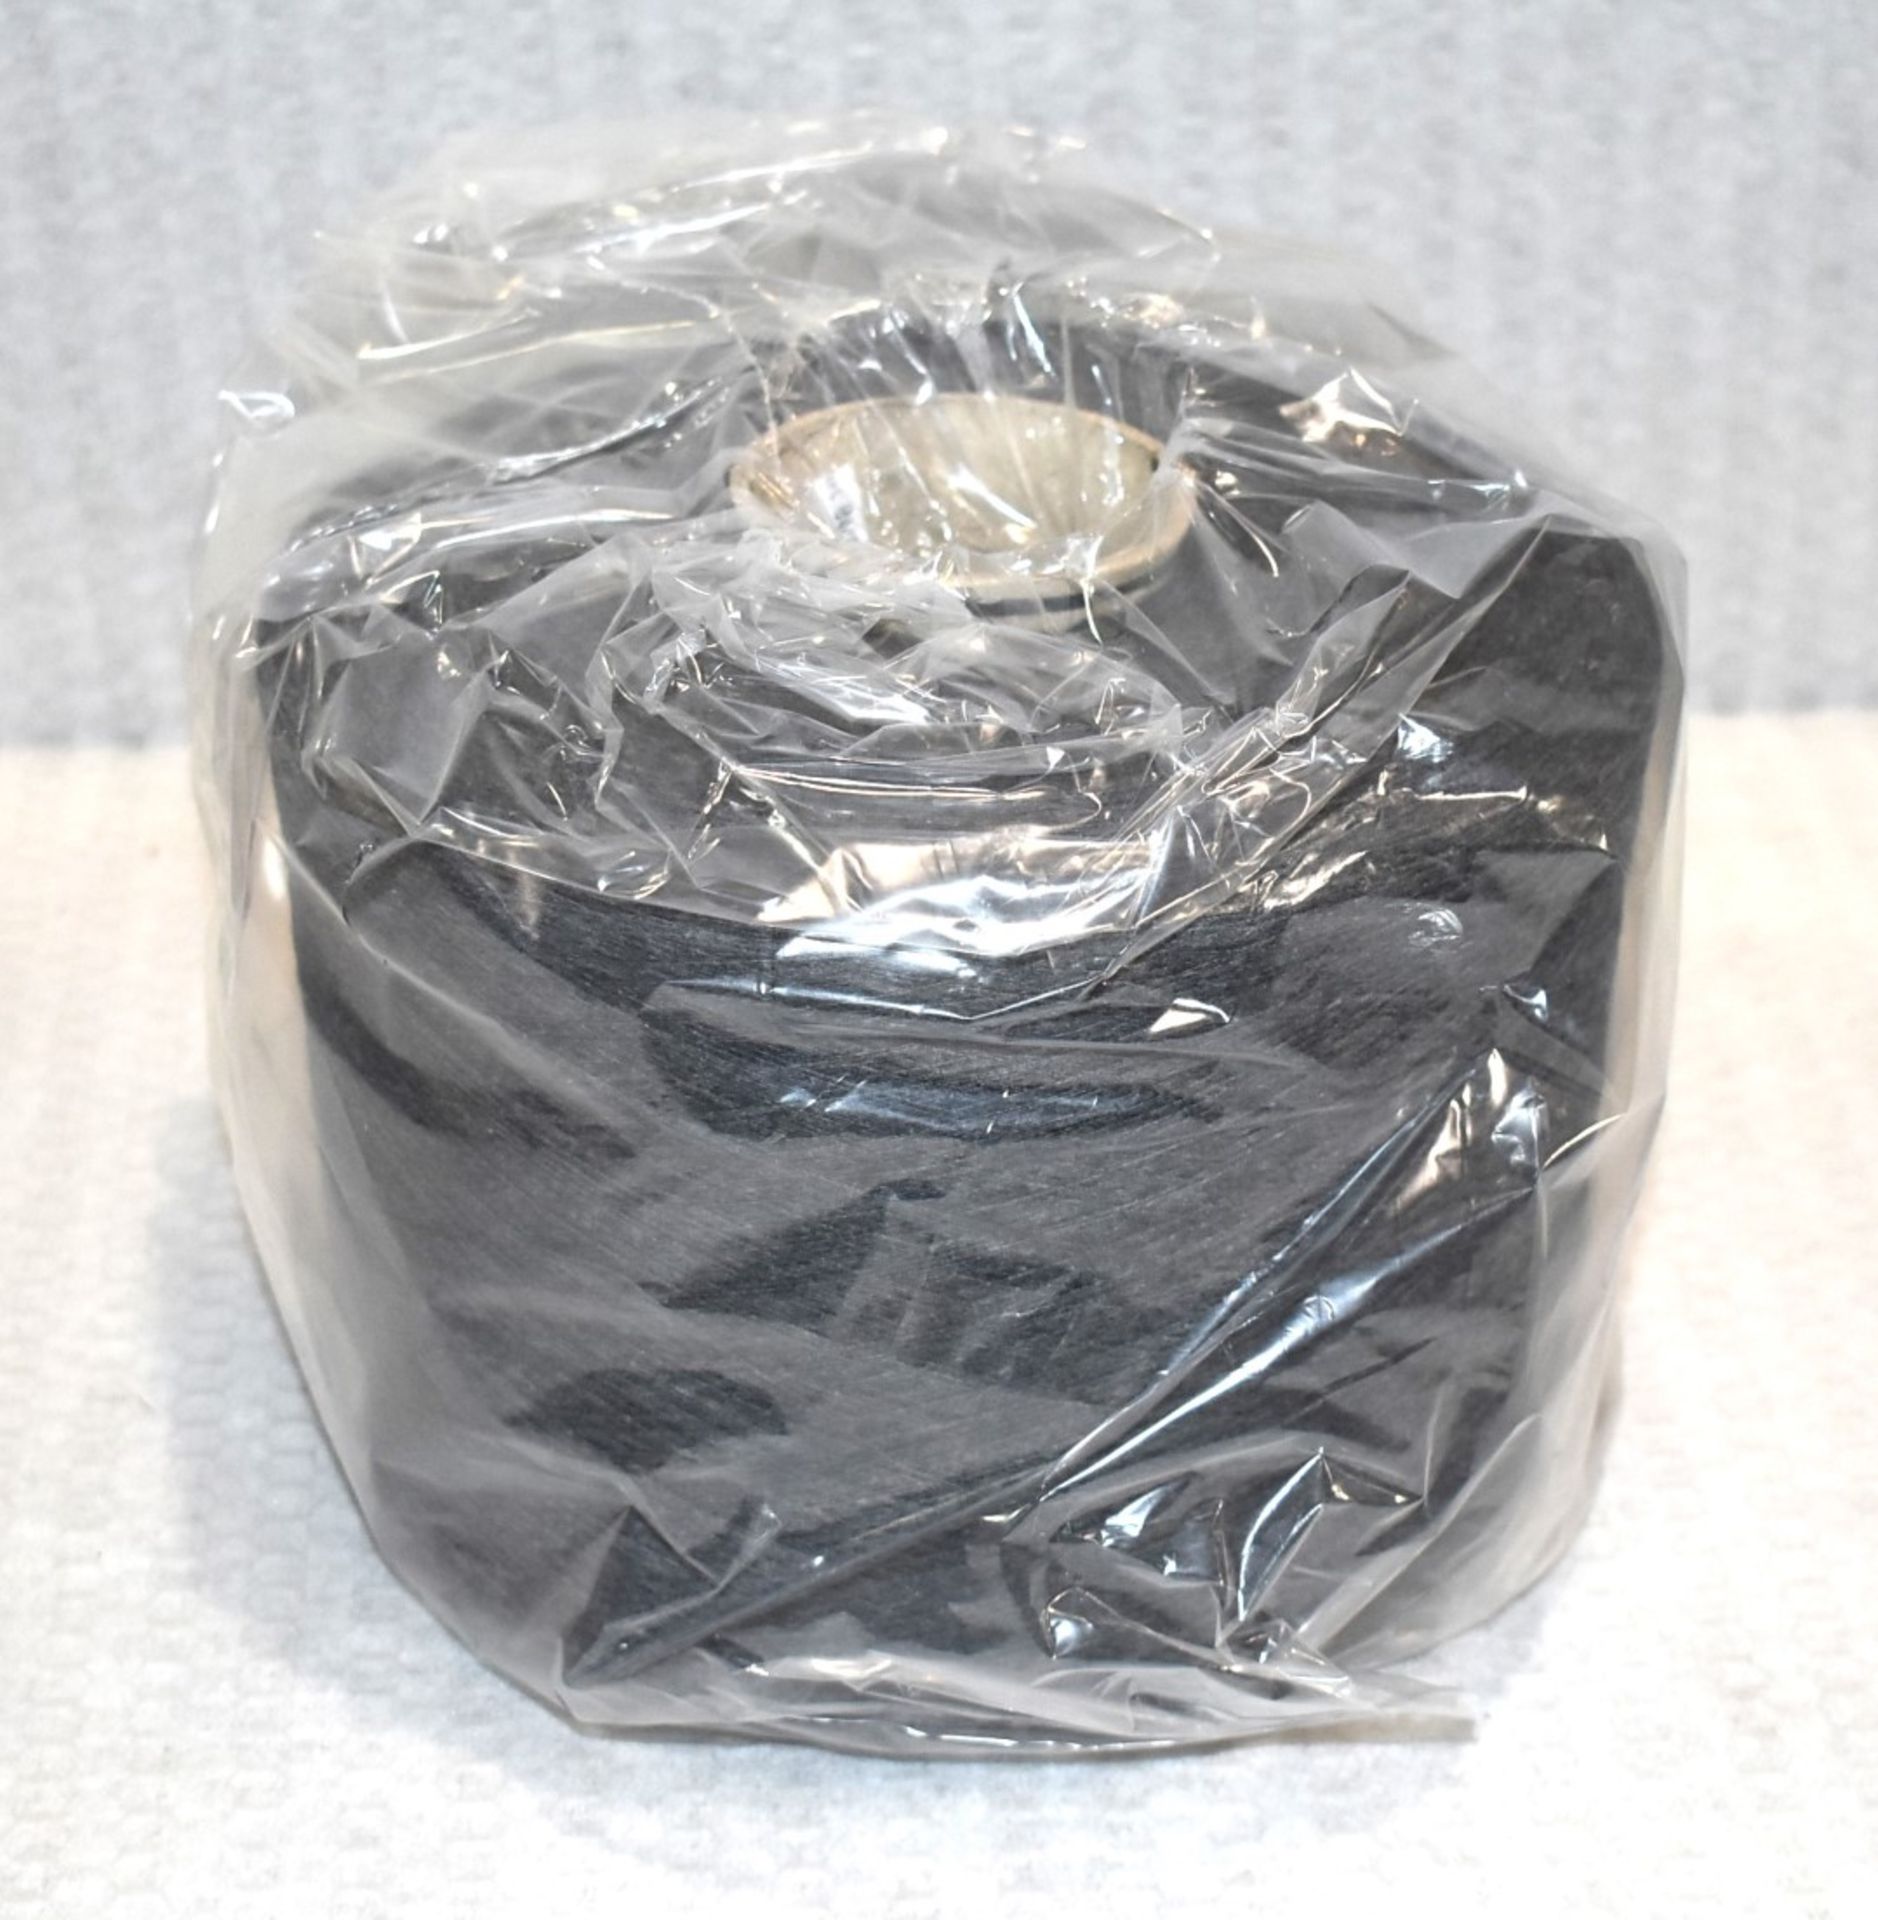 10 x Cones of 1/13 MicroCotton Knitting Yarn - Mid Grey - Approx Weight: 2,500g - New Stock ABL Yarn - Image 13 of 17